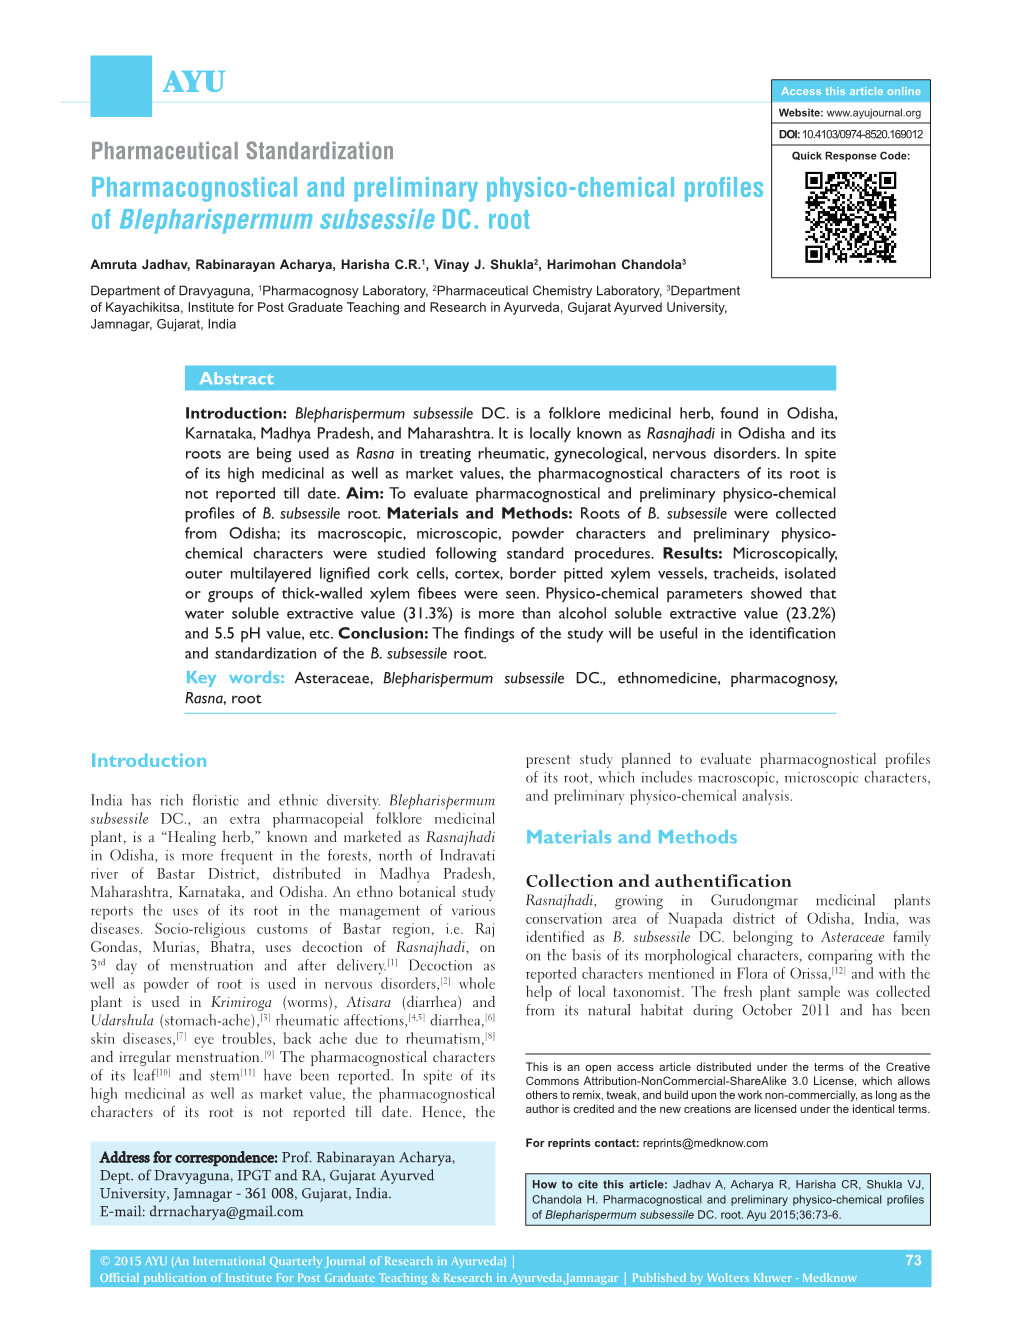 Pharmacognostical and Preliminary Physico-Chemical Profiles of Blepharispermum Subsessile DC